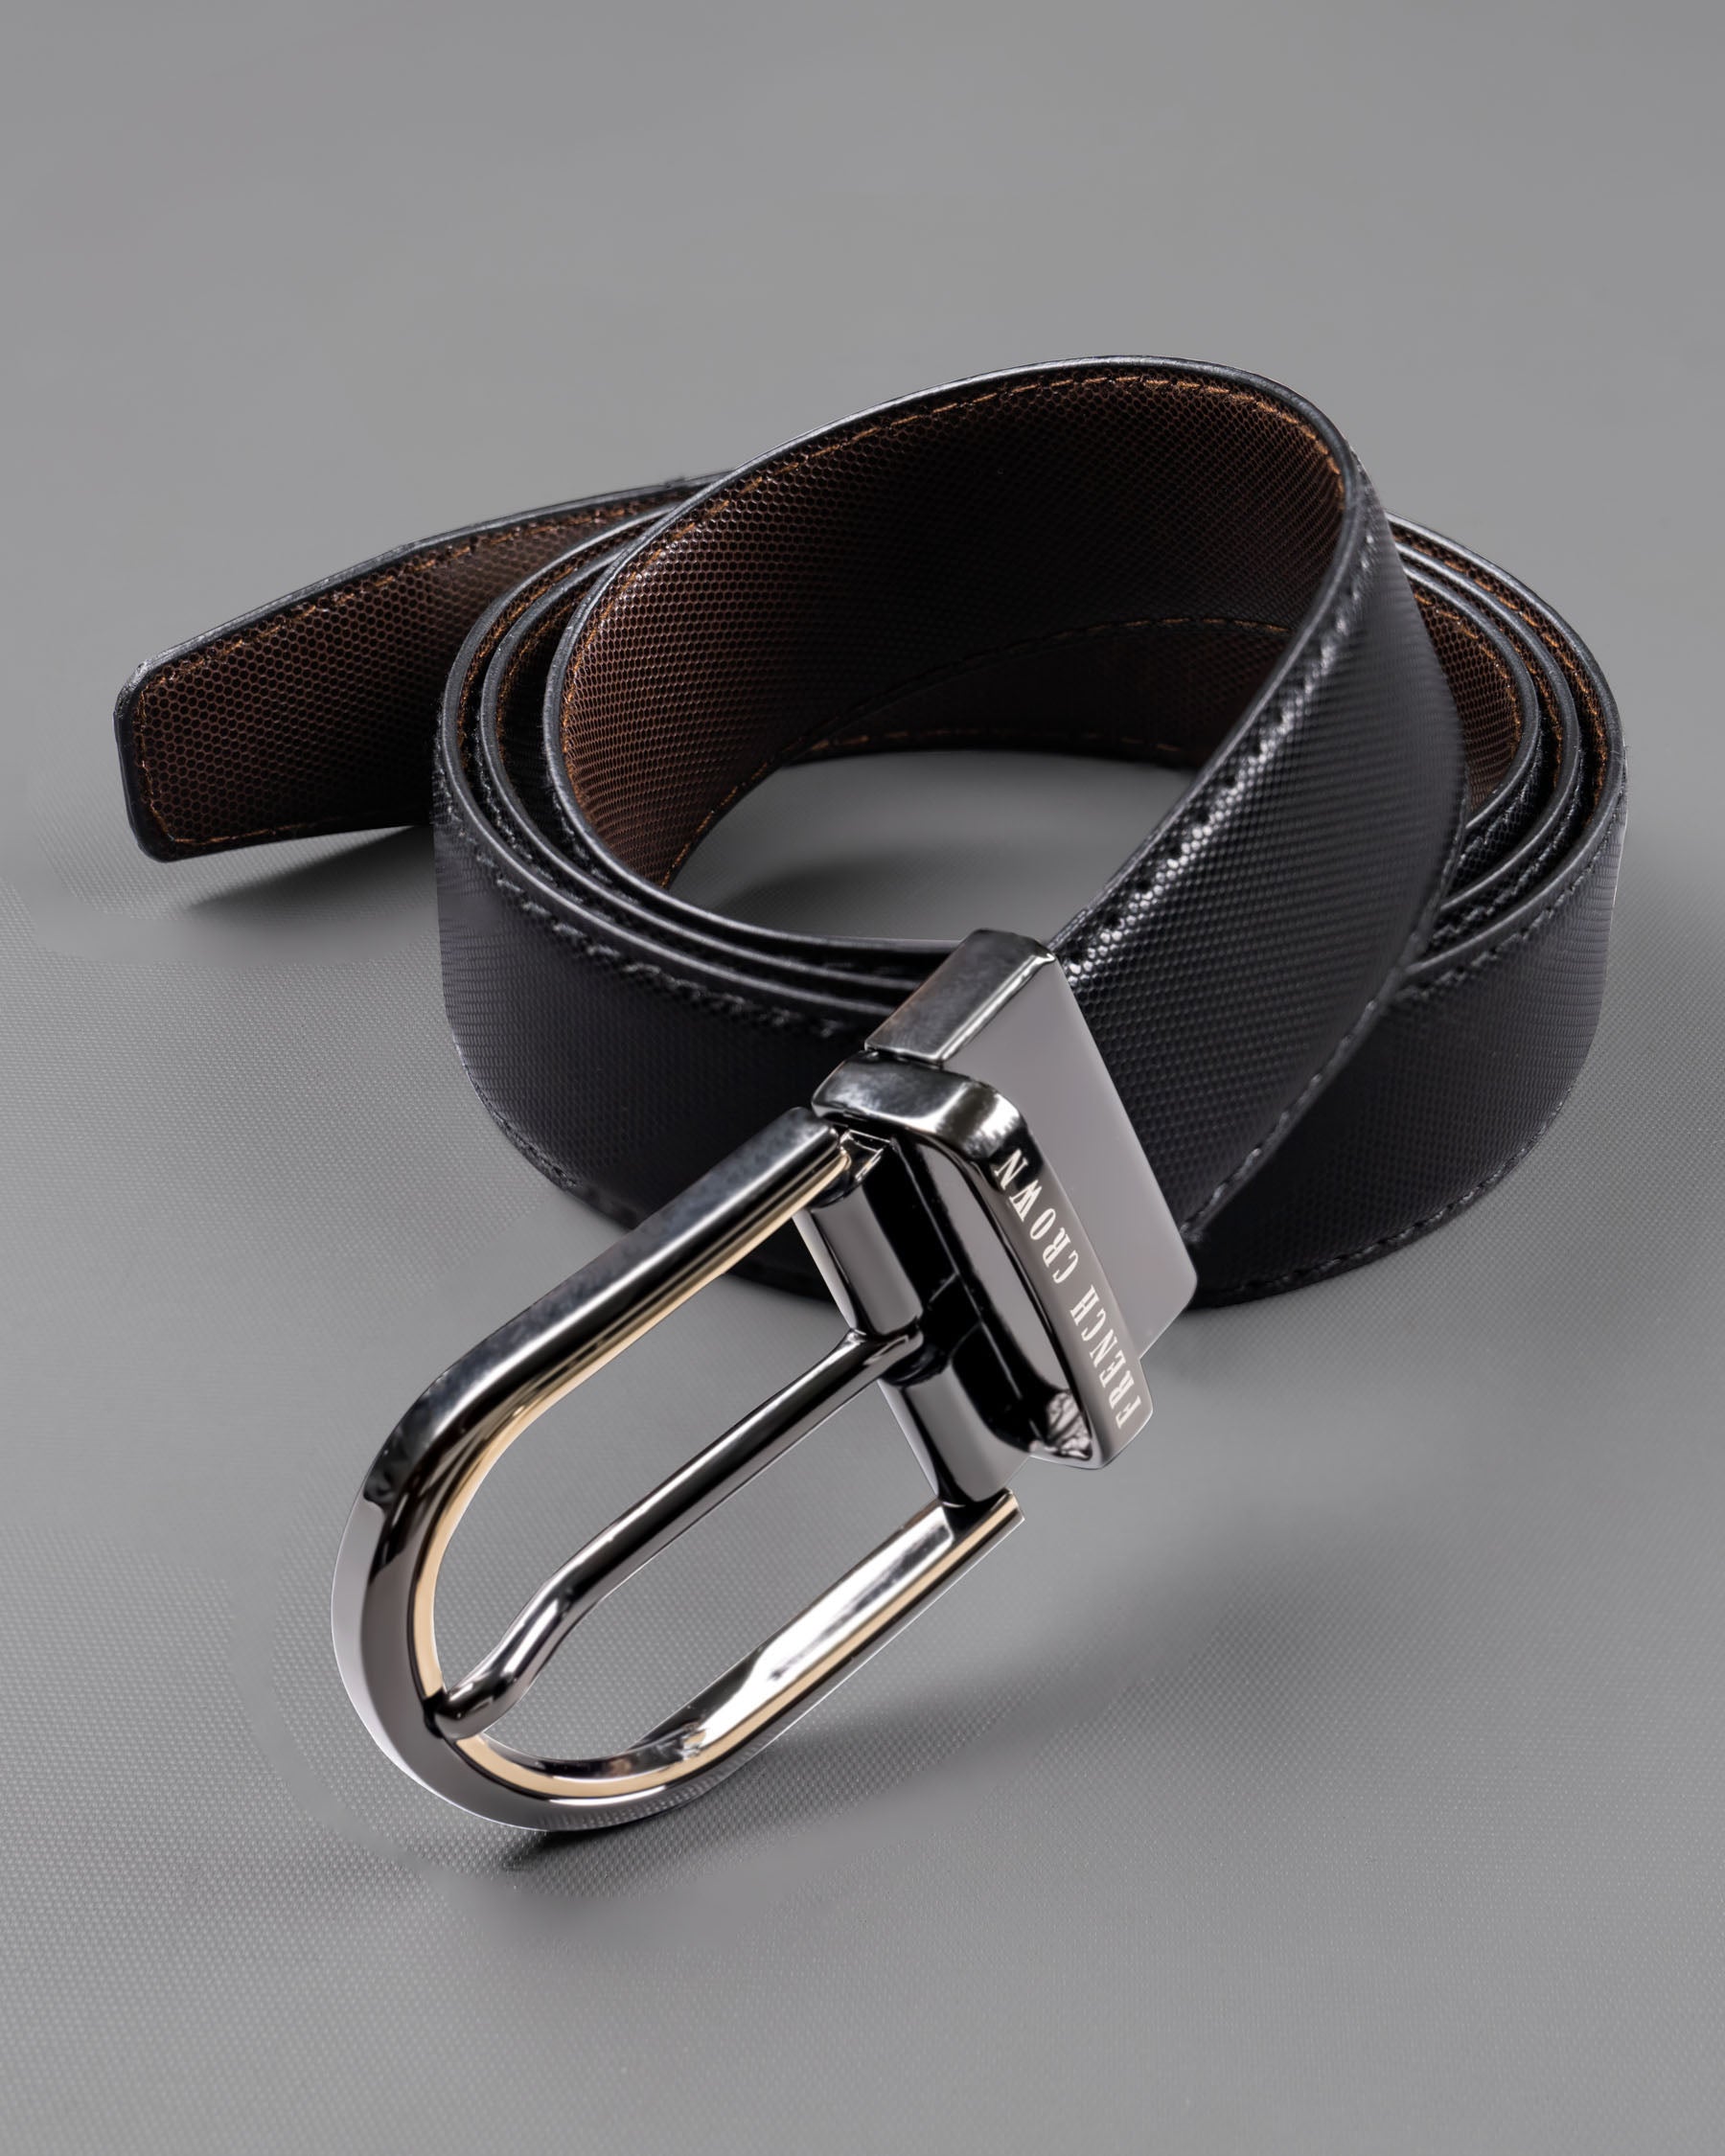 Glossy grey with Golden oval buckled Reversible jade Black and Brown Vegan Leather Handcrafted Belt